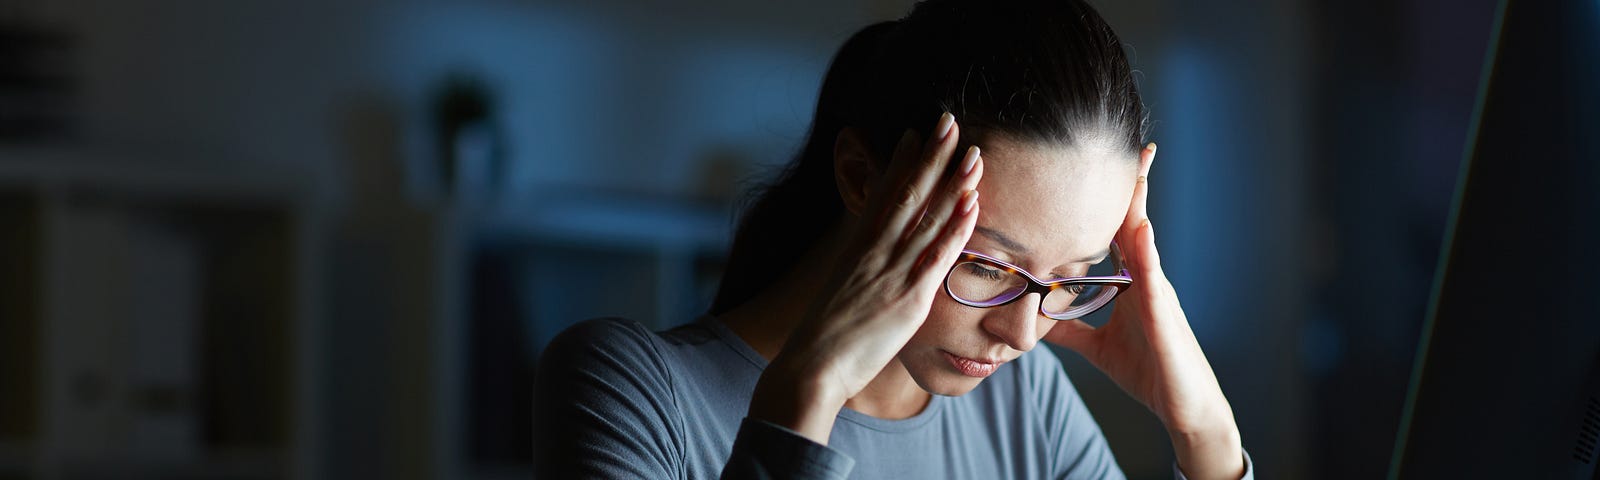 woman with glasses and long sleeves shirt, stressed in front of computer in night lighting